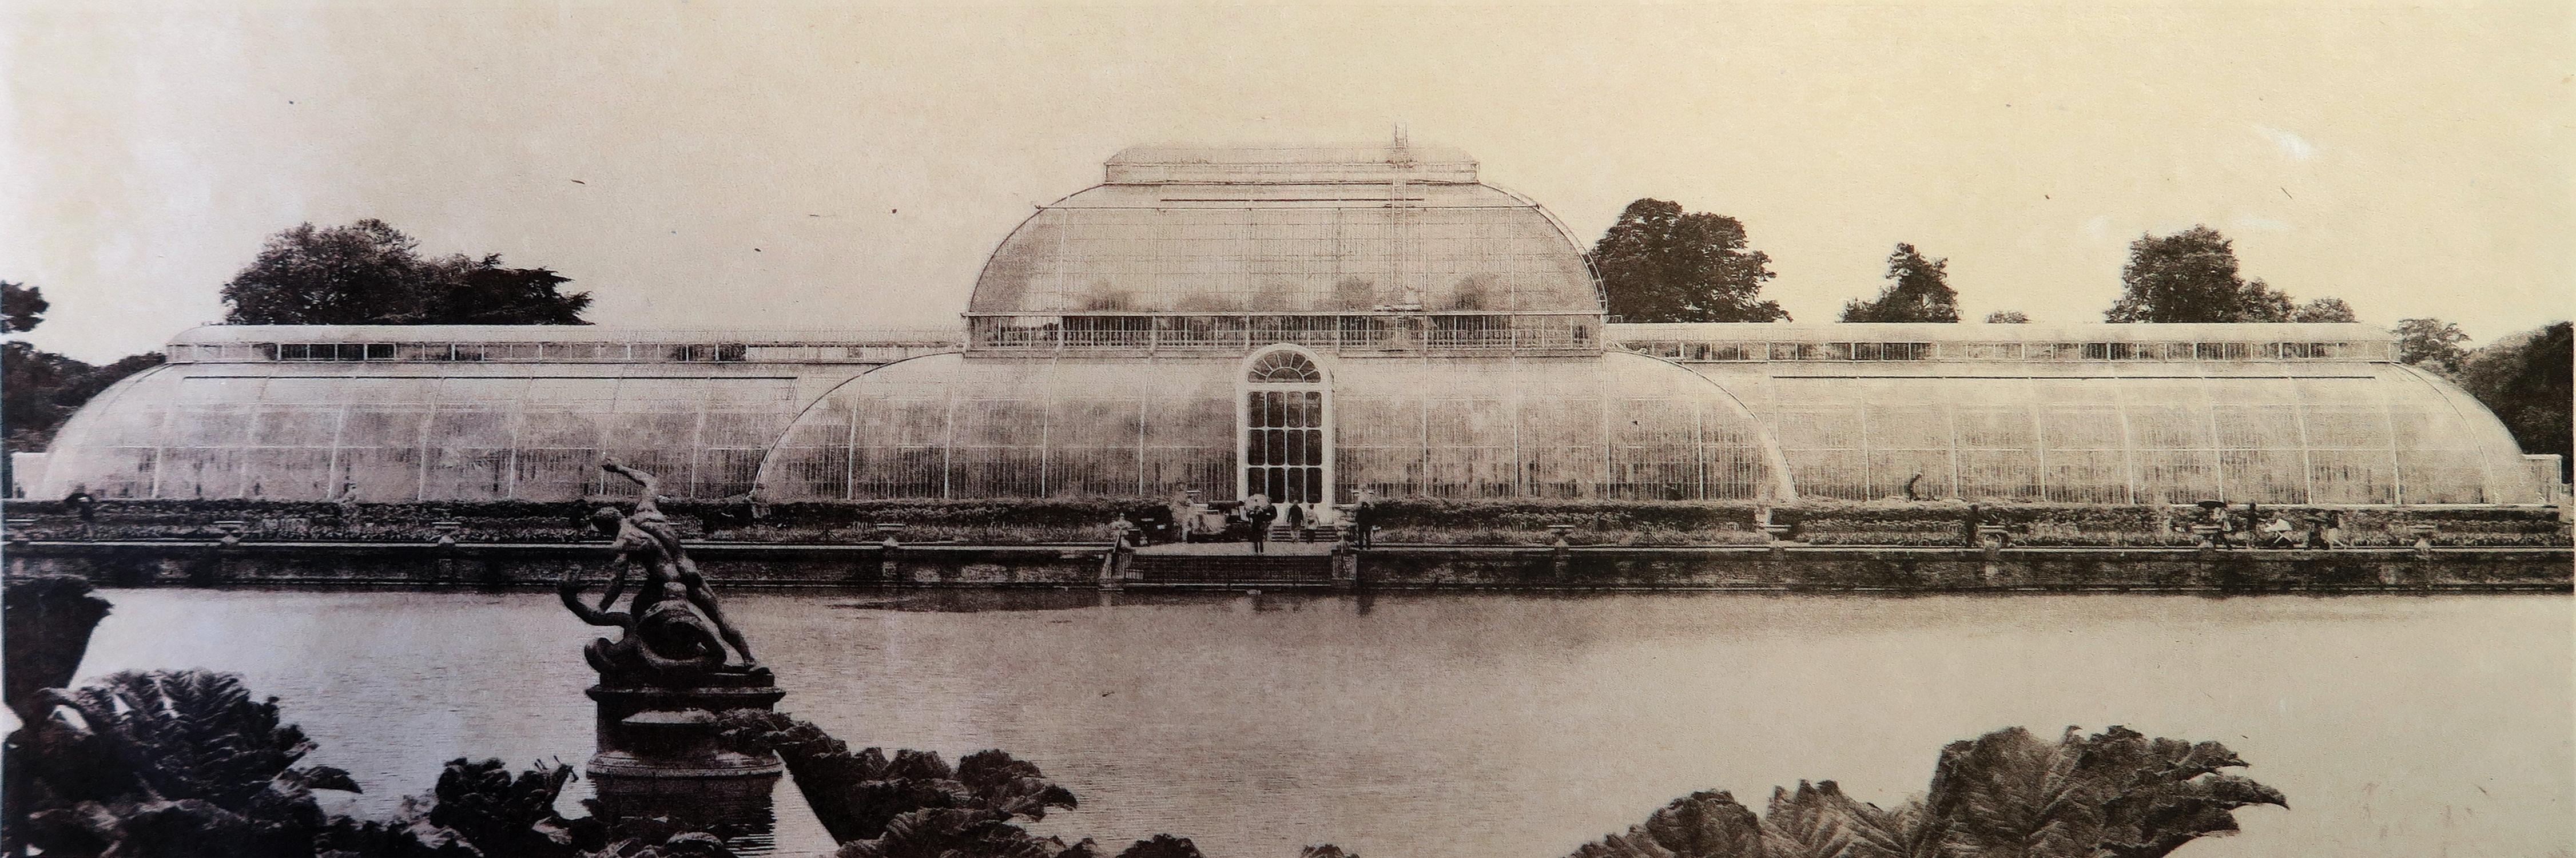 Paradise at Kew Gardens, hand printed photo lithography on Japanese paper 2018,  - Print by Penelope Stewart